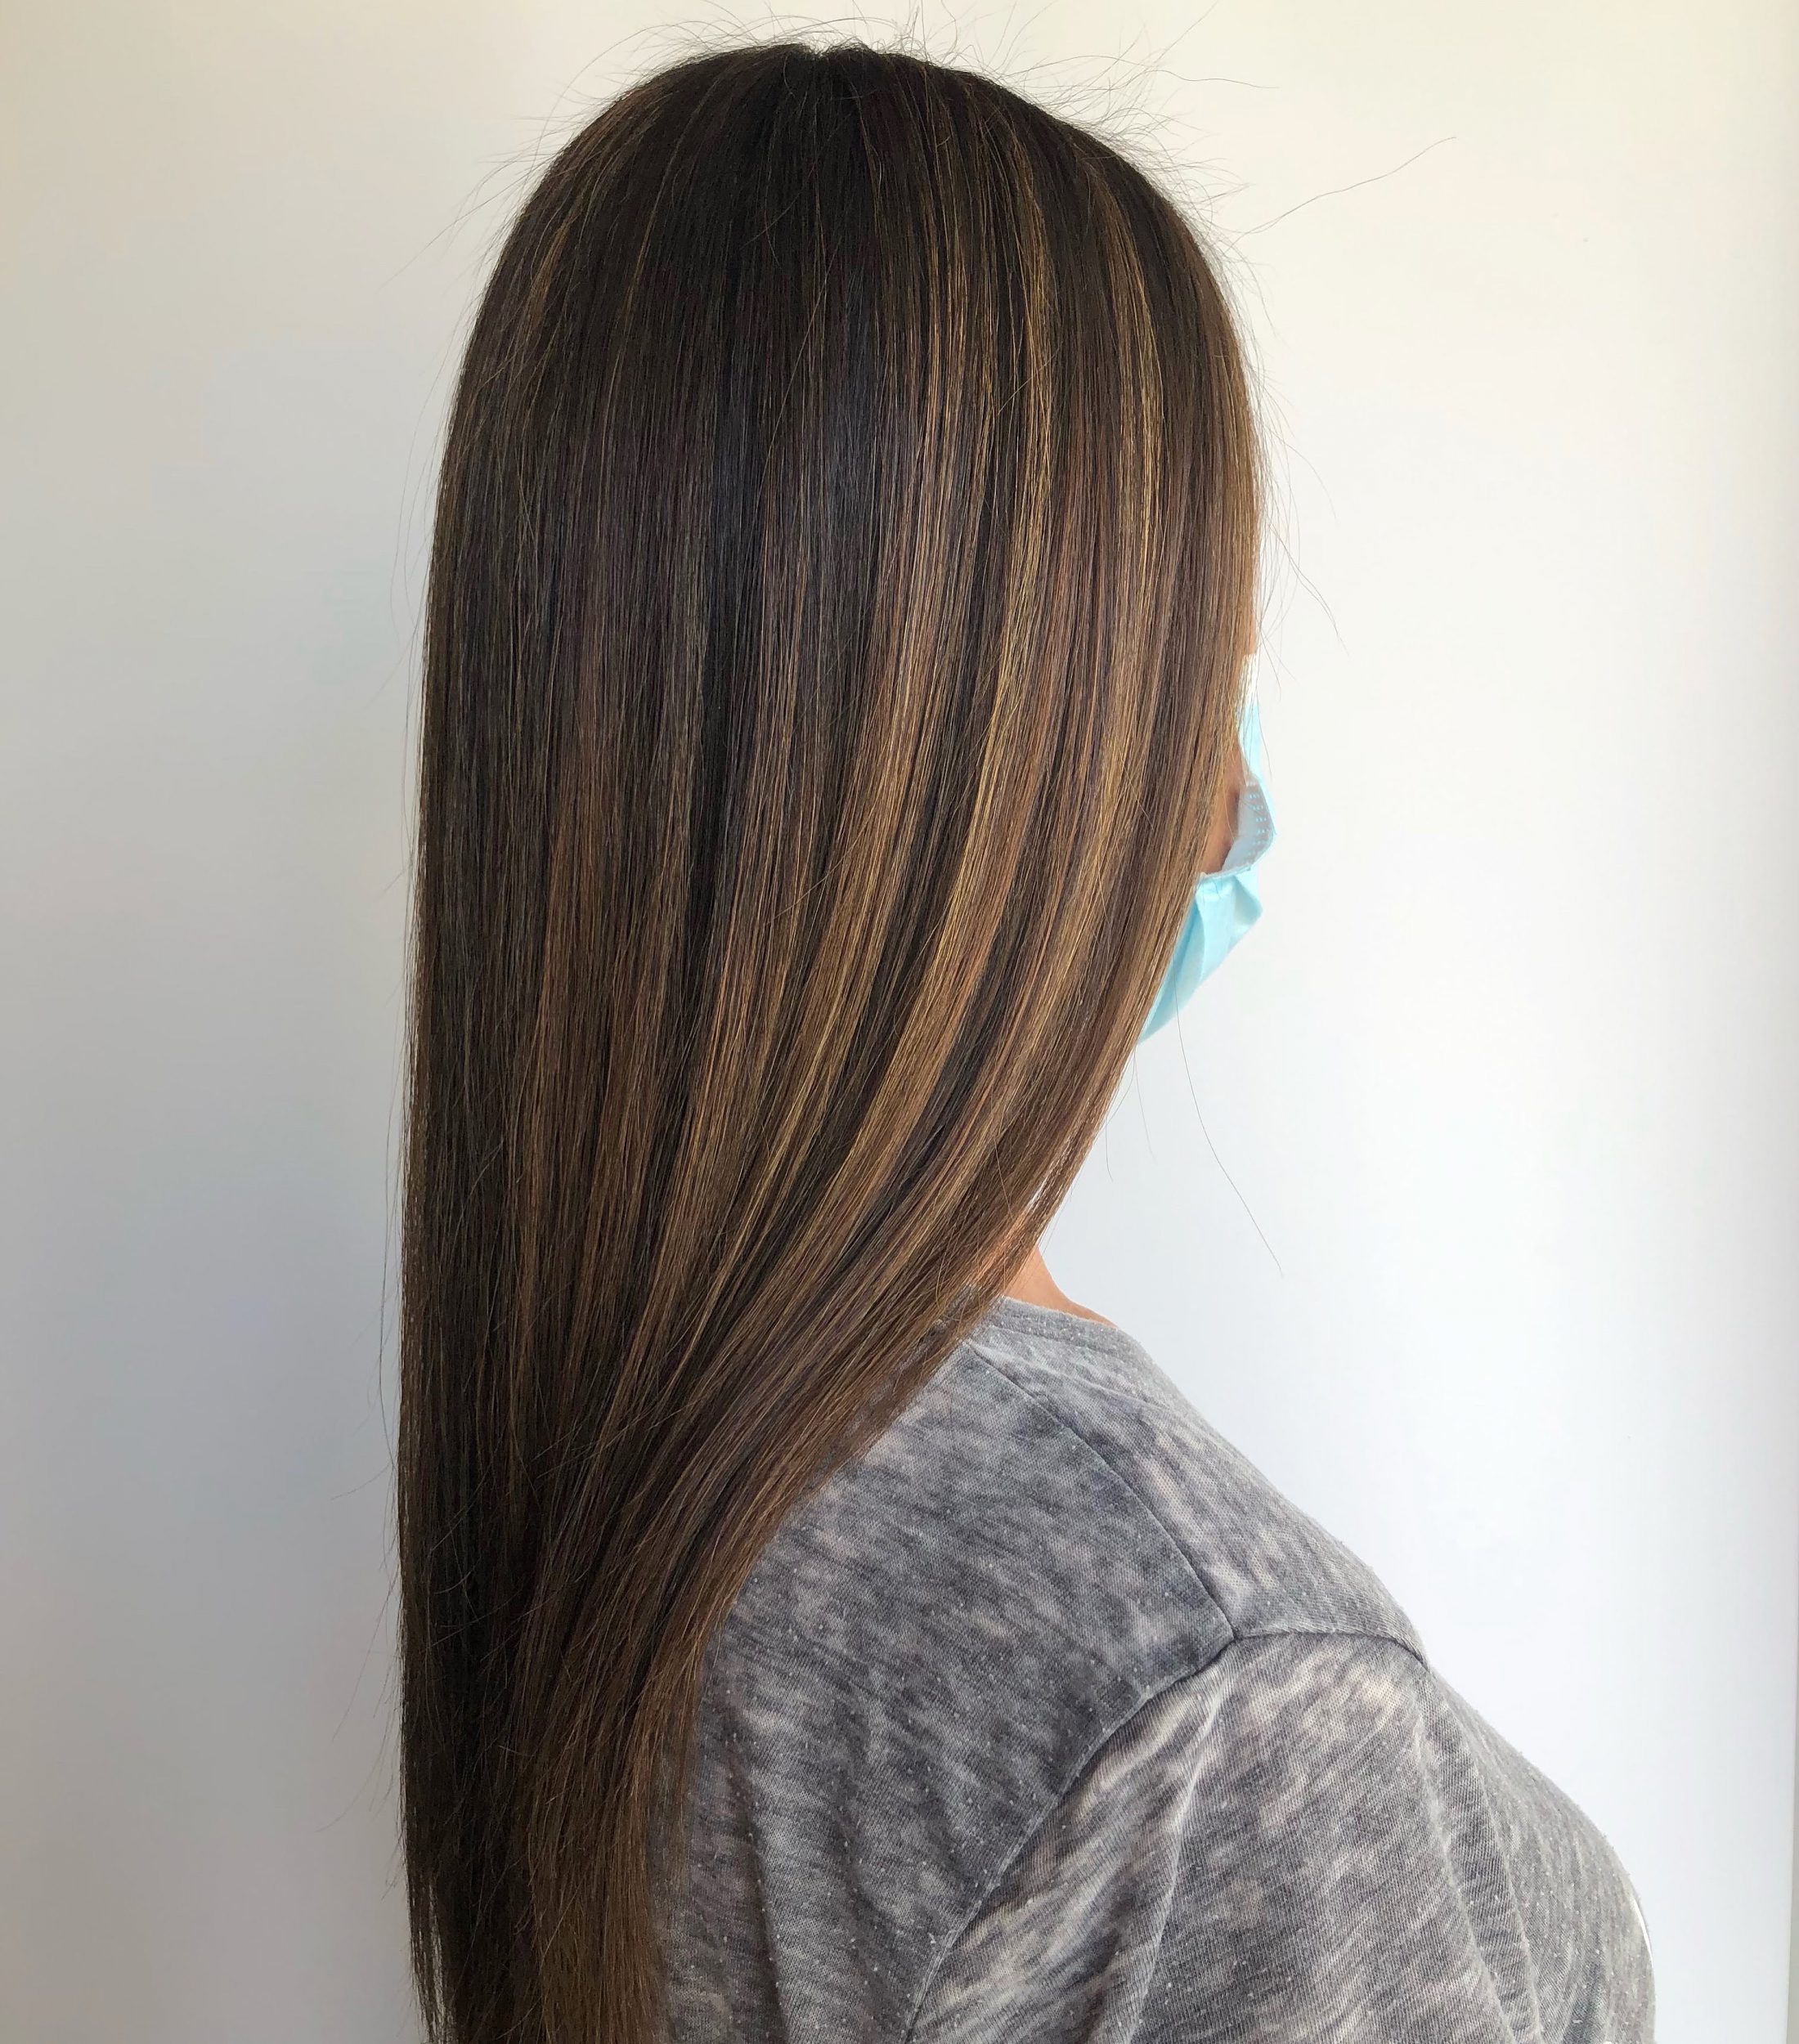 Long brunette with highlights.